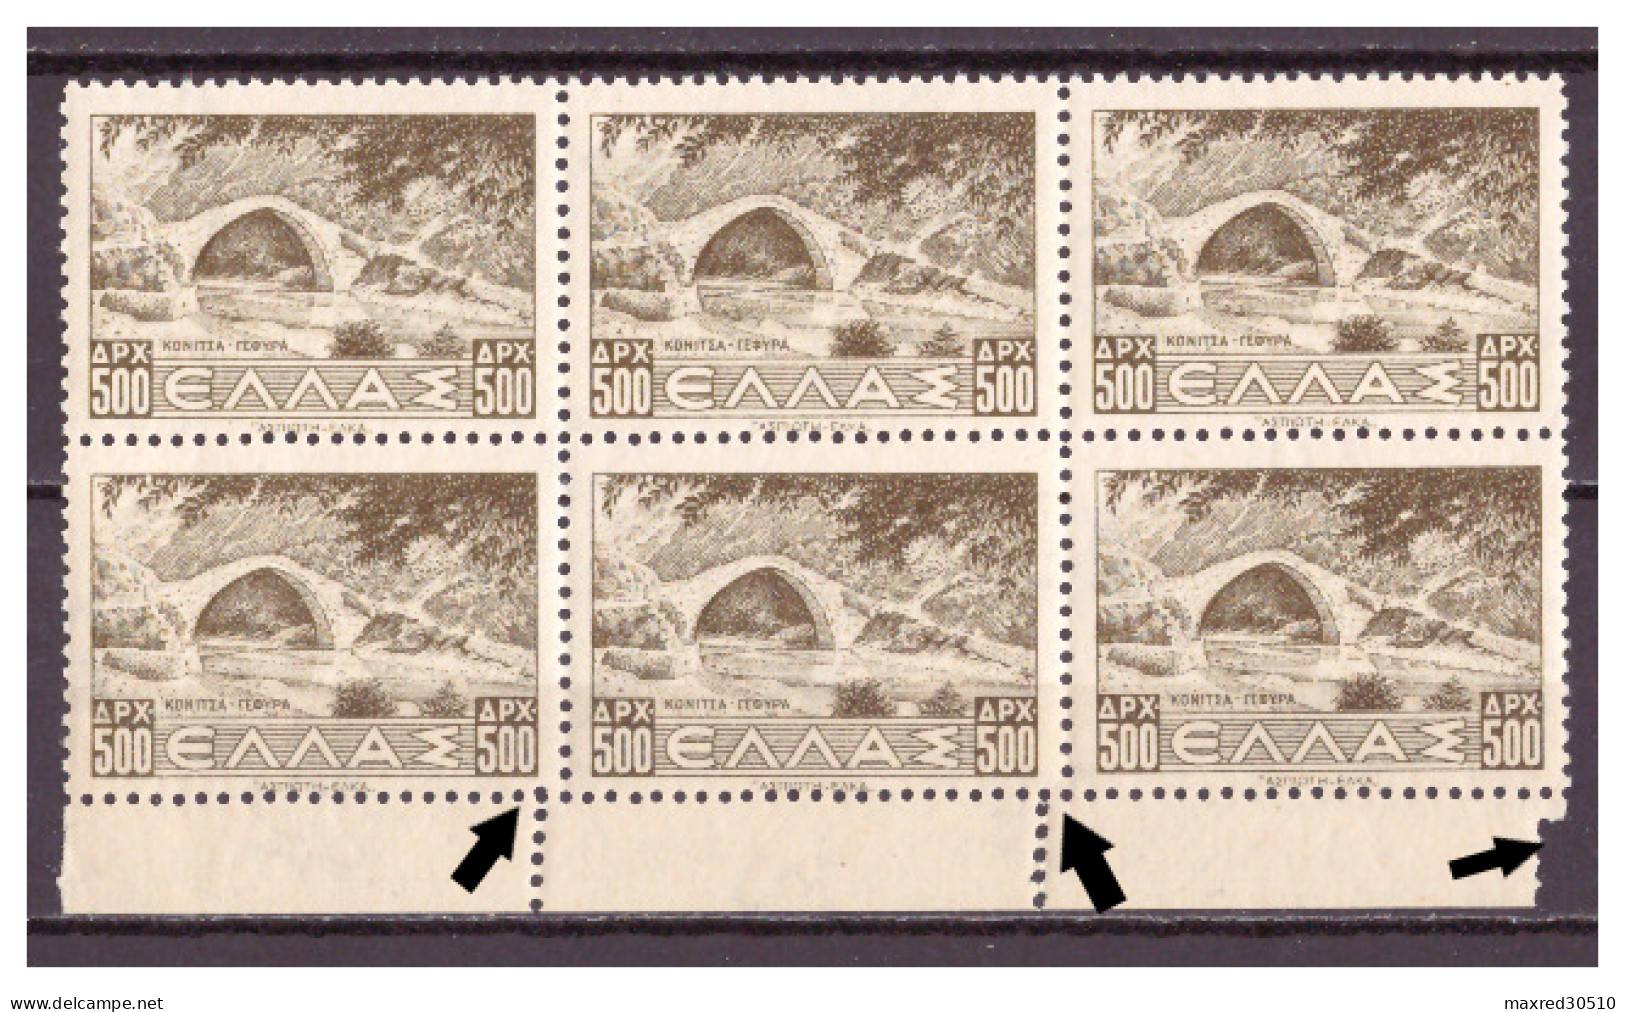 GREECE 1942 - 44 BLOCK OF 6X500DR. OF "LANDSCAPES ISSUE" WITH PRINTING ERRORS AT THE VERTICAL PERFO OF MARGIN SHEET MNH - Varietà & Curiosità